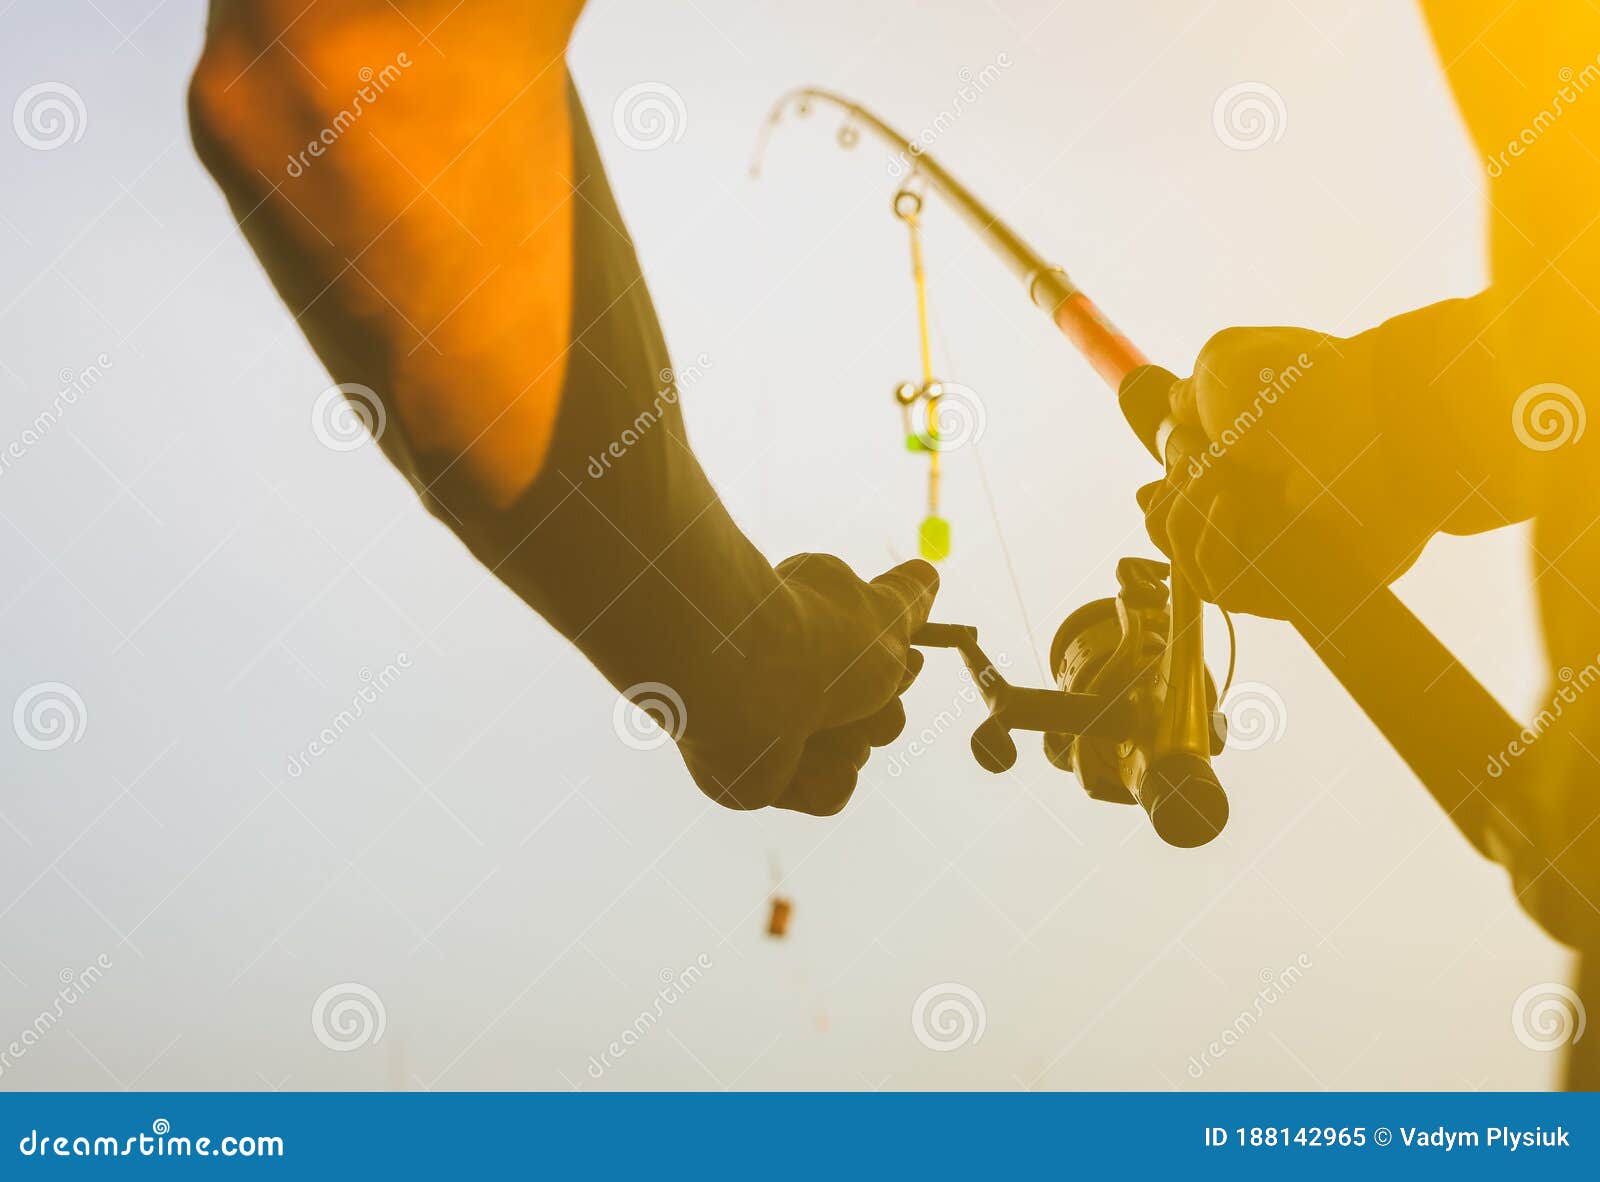 3,960 Fishing Rods Lake Stock Photos - Free & Royalty-Free Stock Photos  from Dreamstime